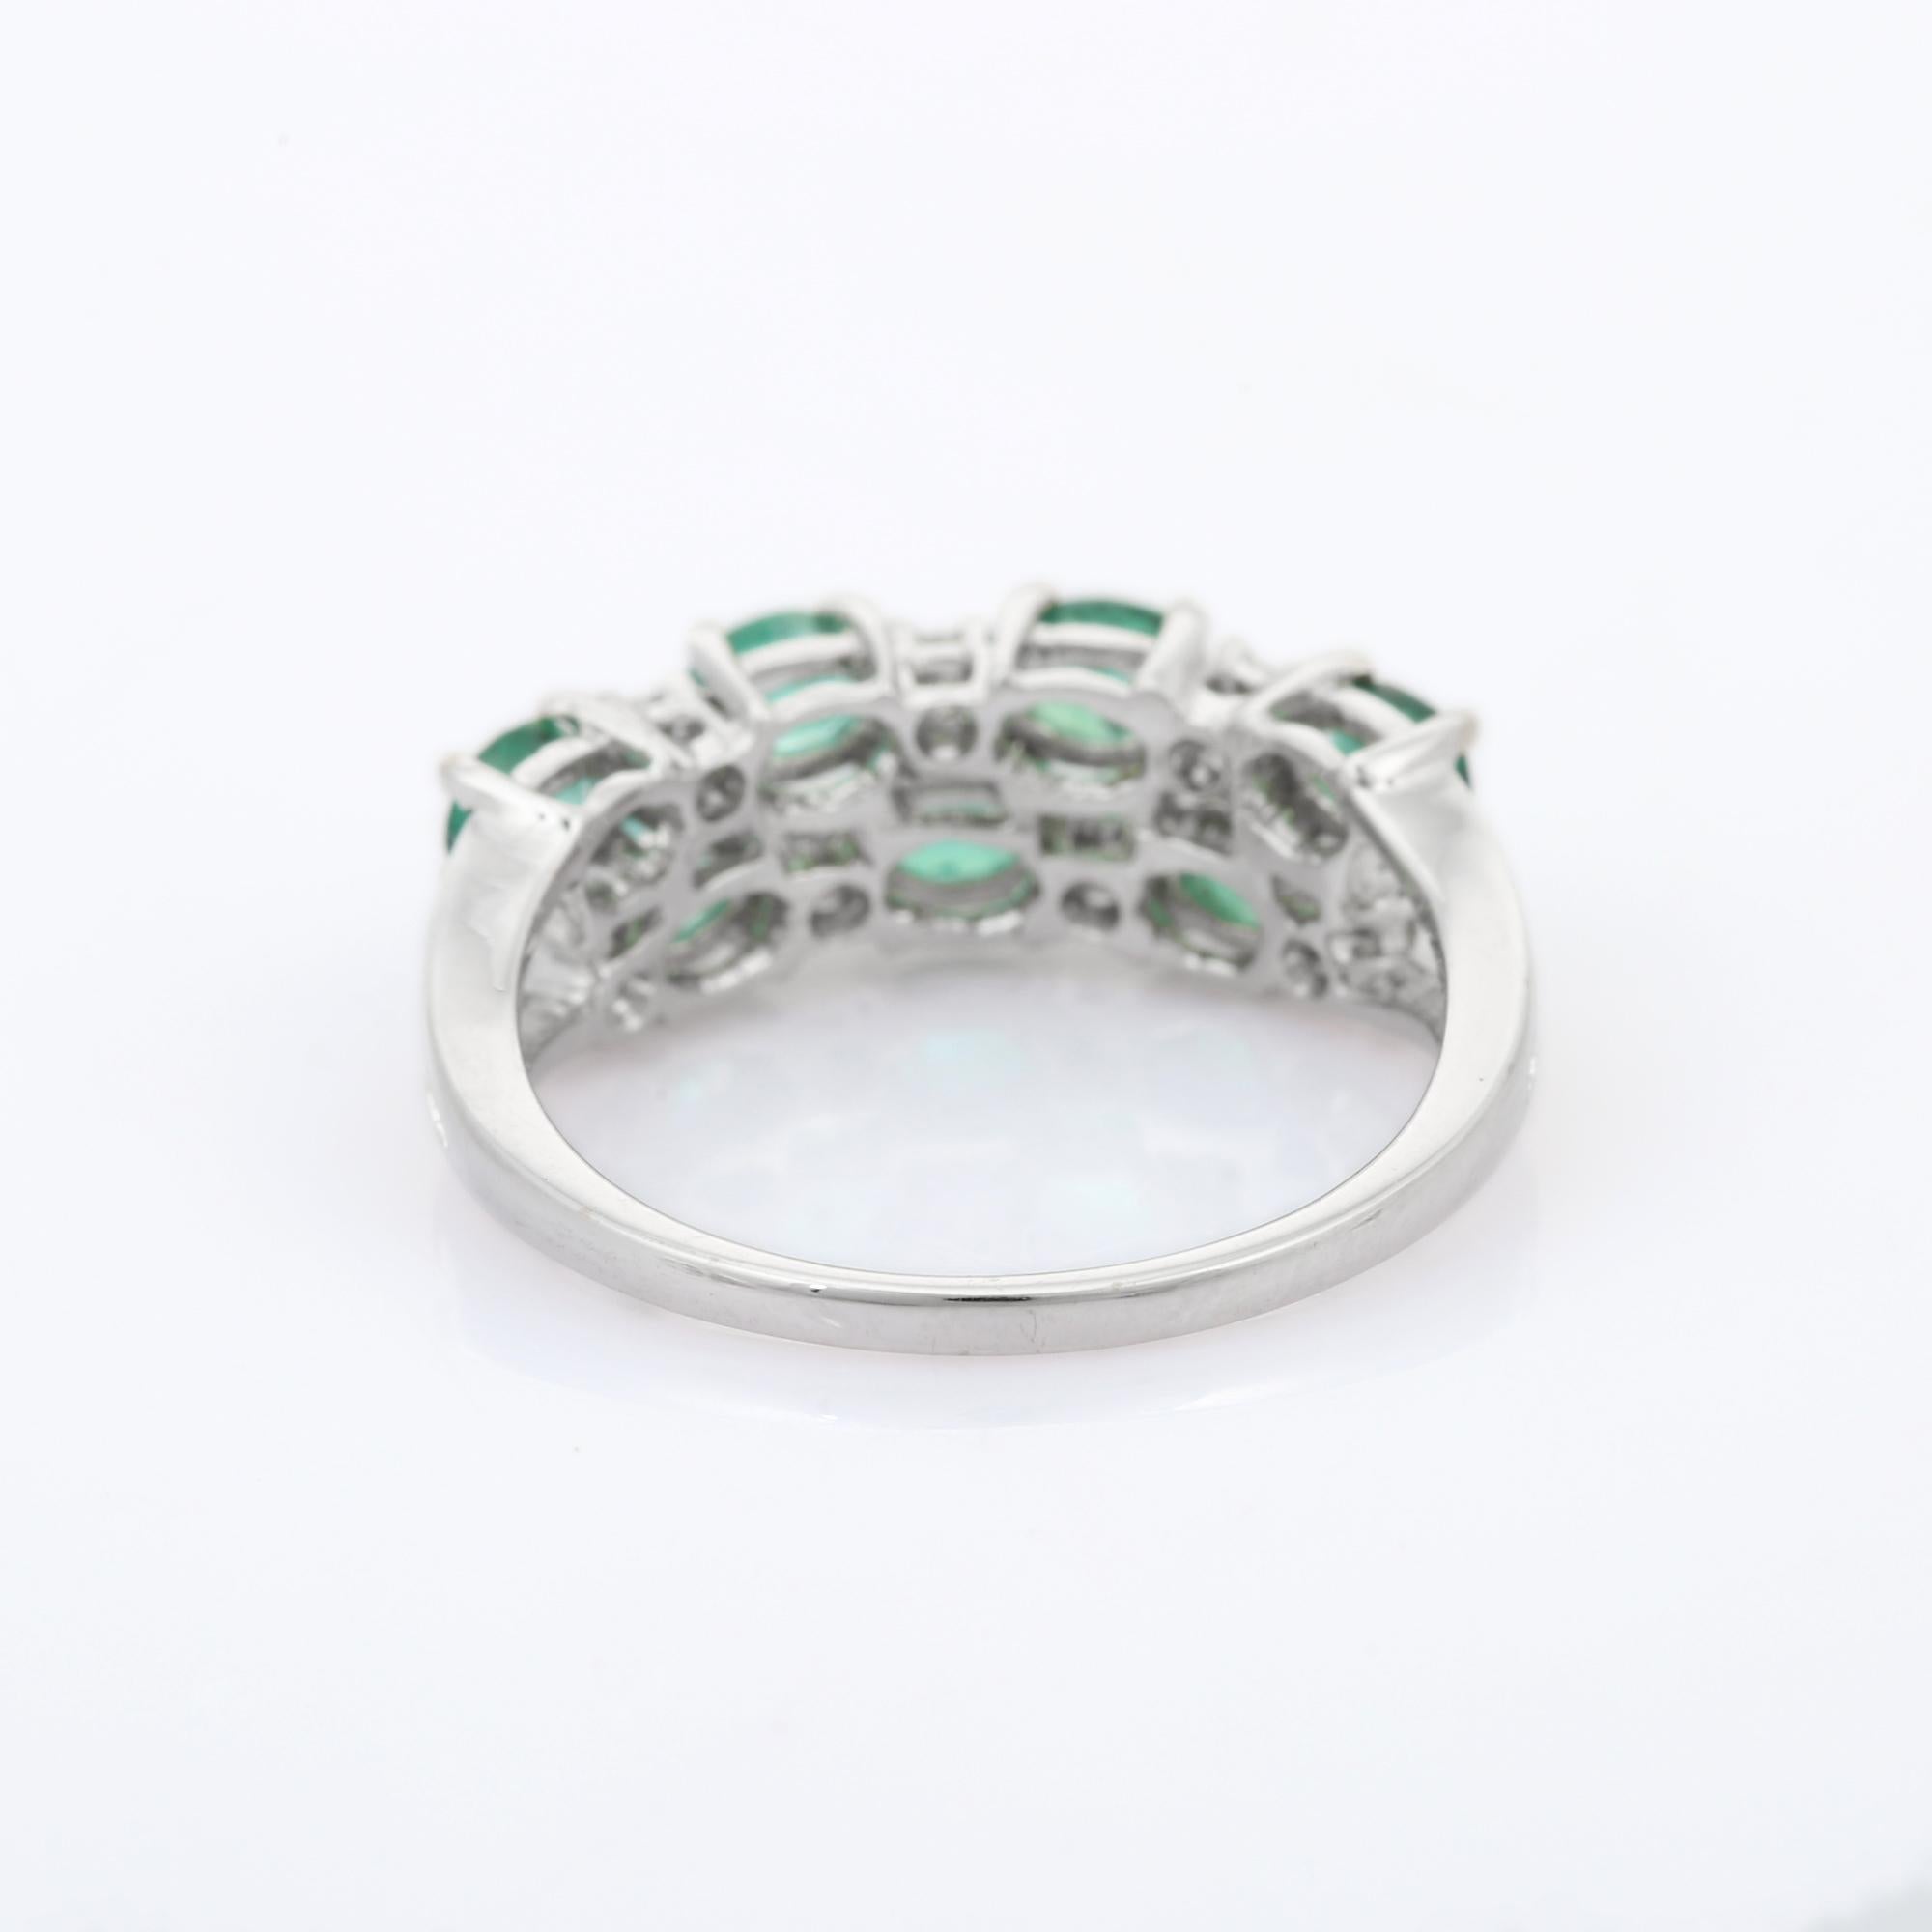 For Sale:  Brilliant Diamond and Emerald Wedding Band Ring Studded in 18k White Gold 4